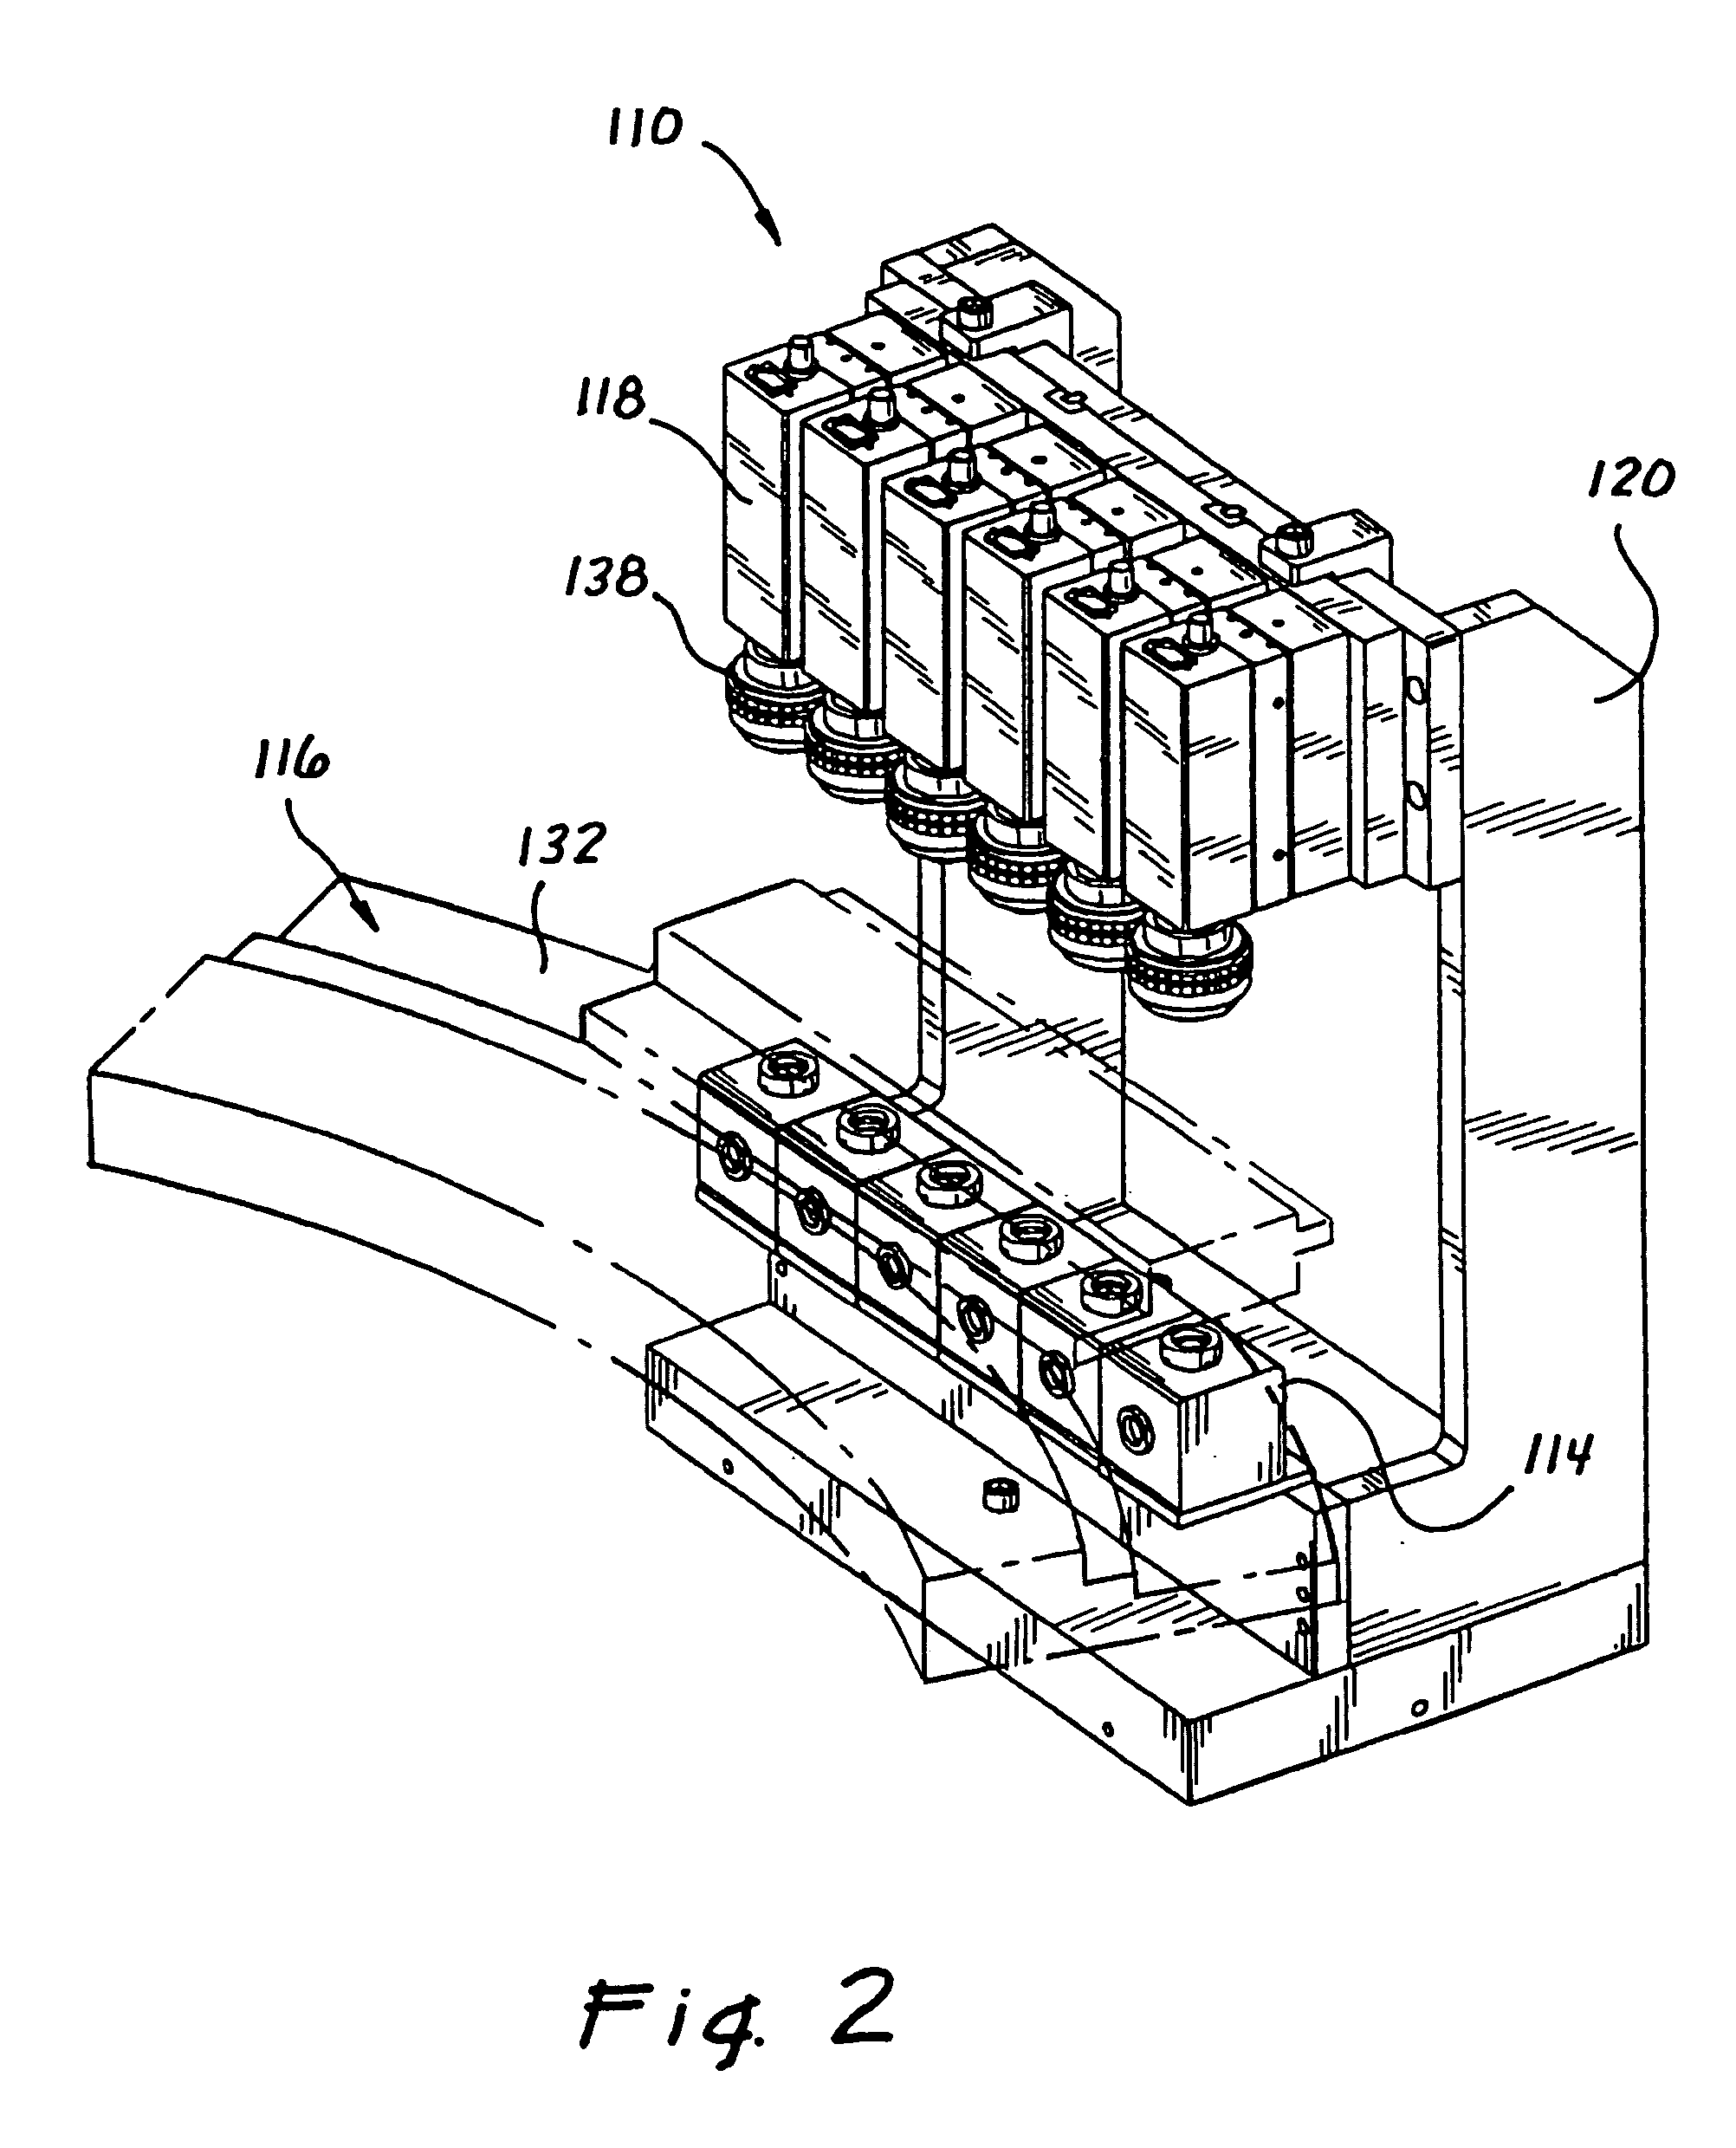 Systems and methods for inspection of ophthalmic lenses